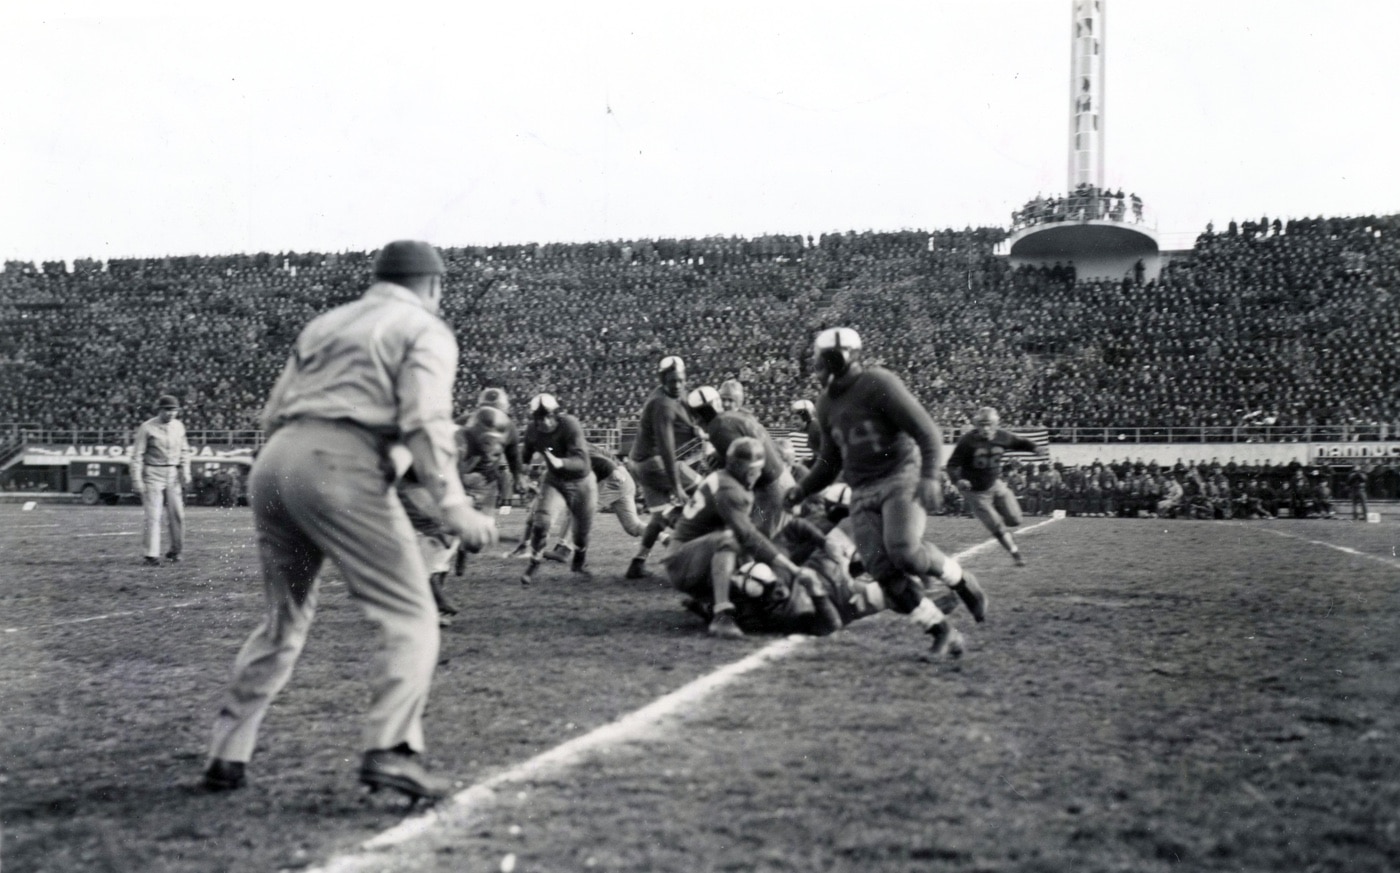 football running play during the spaghetti bowl on january 1 1945 in italy during world war 2